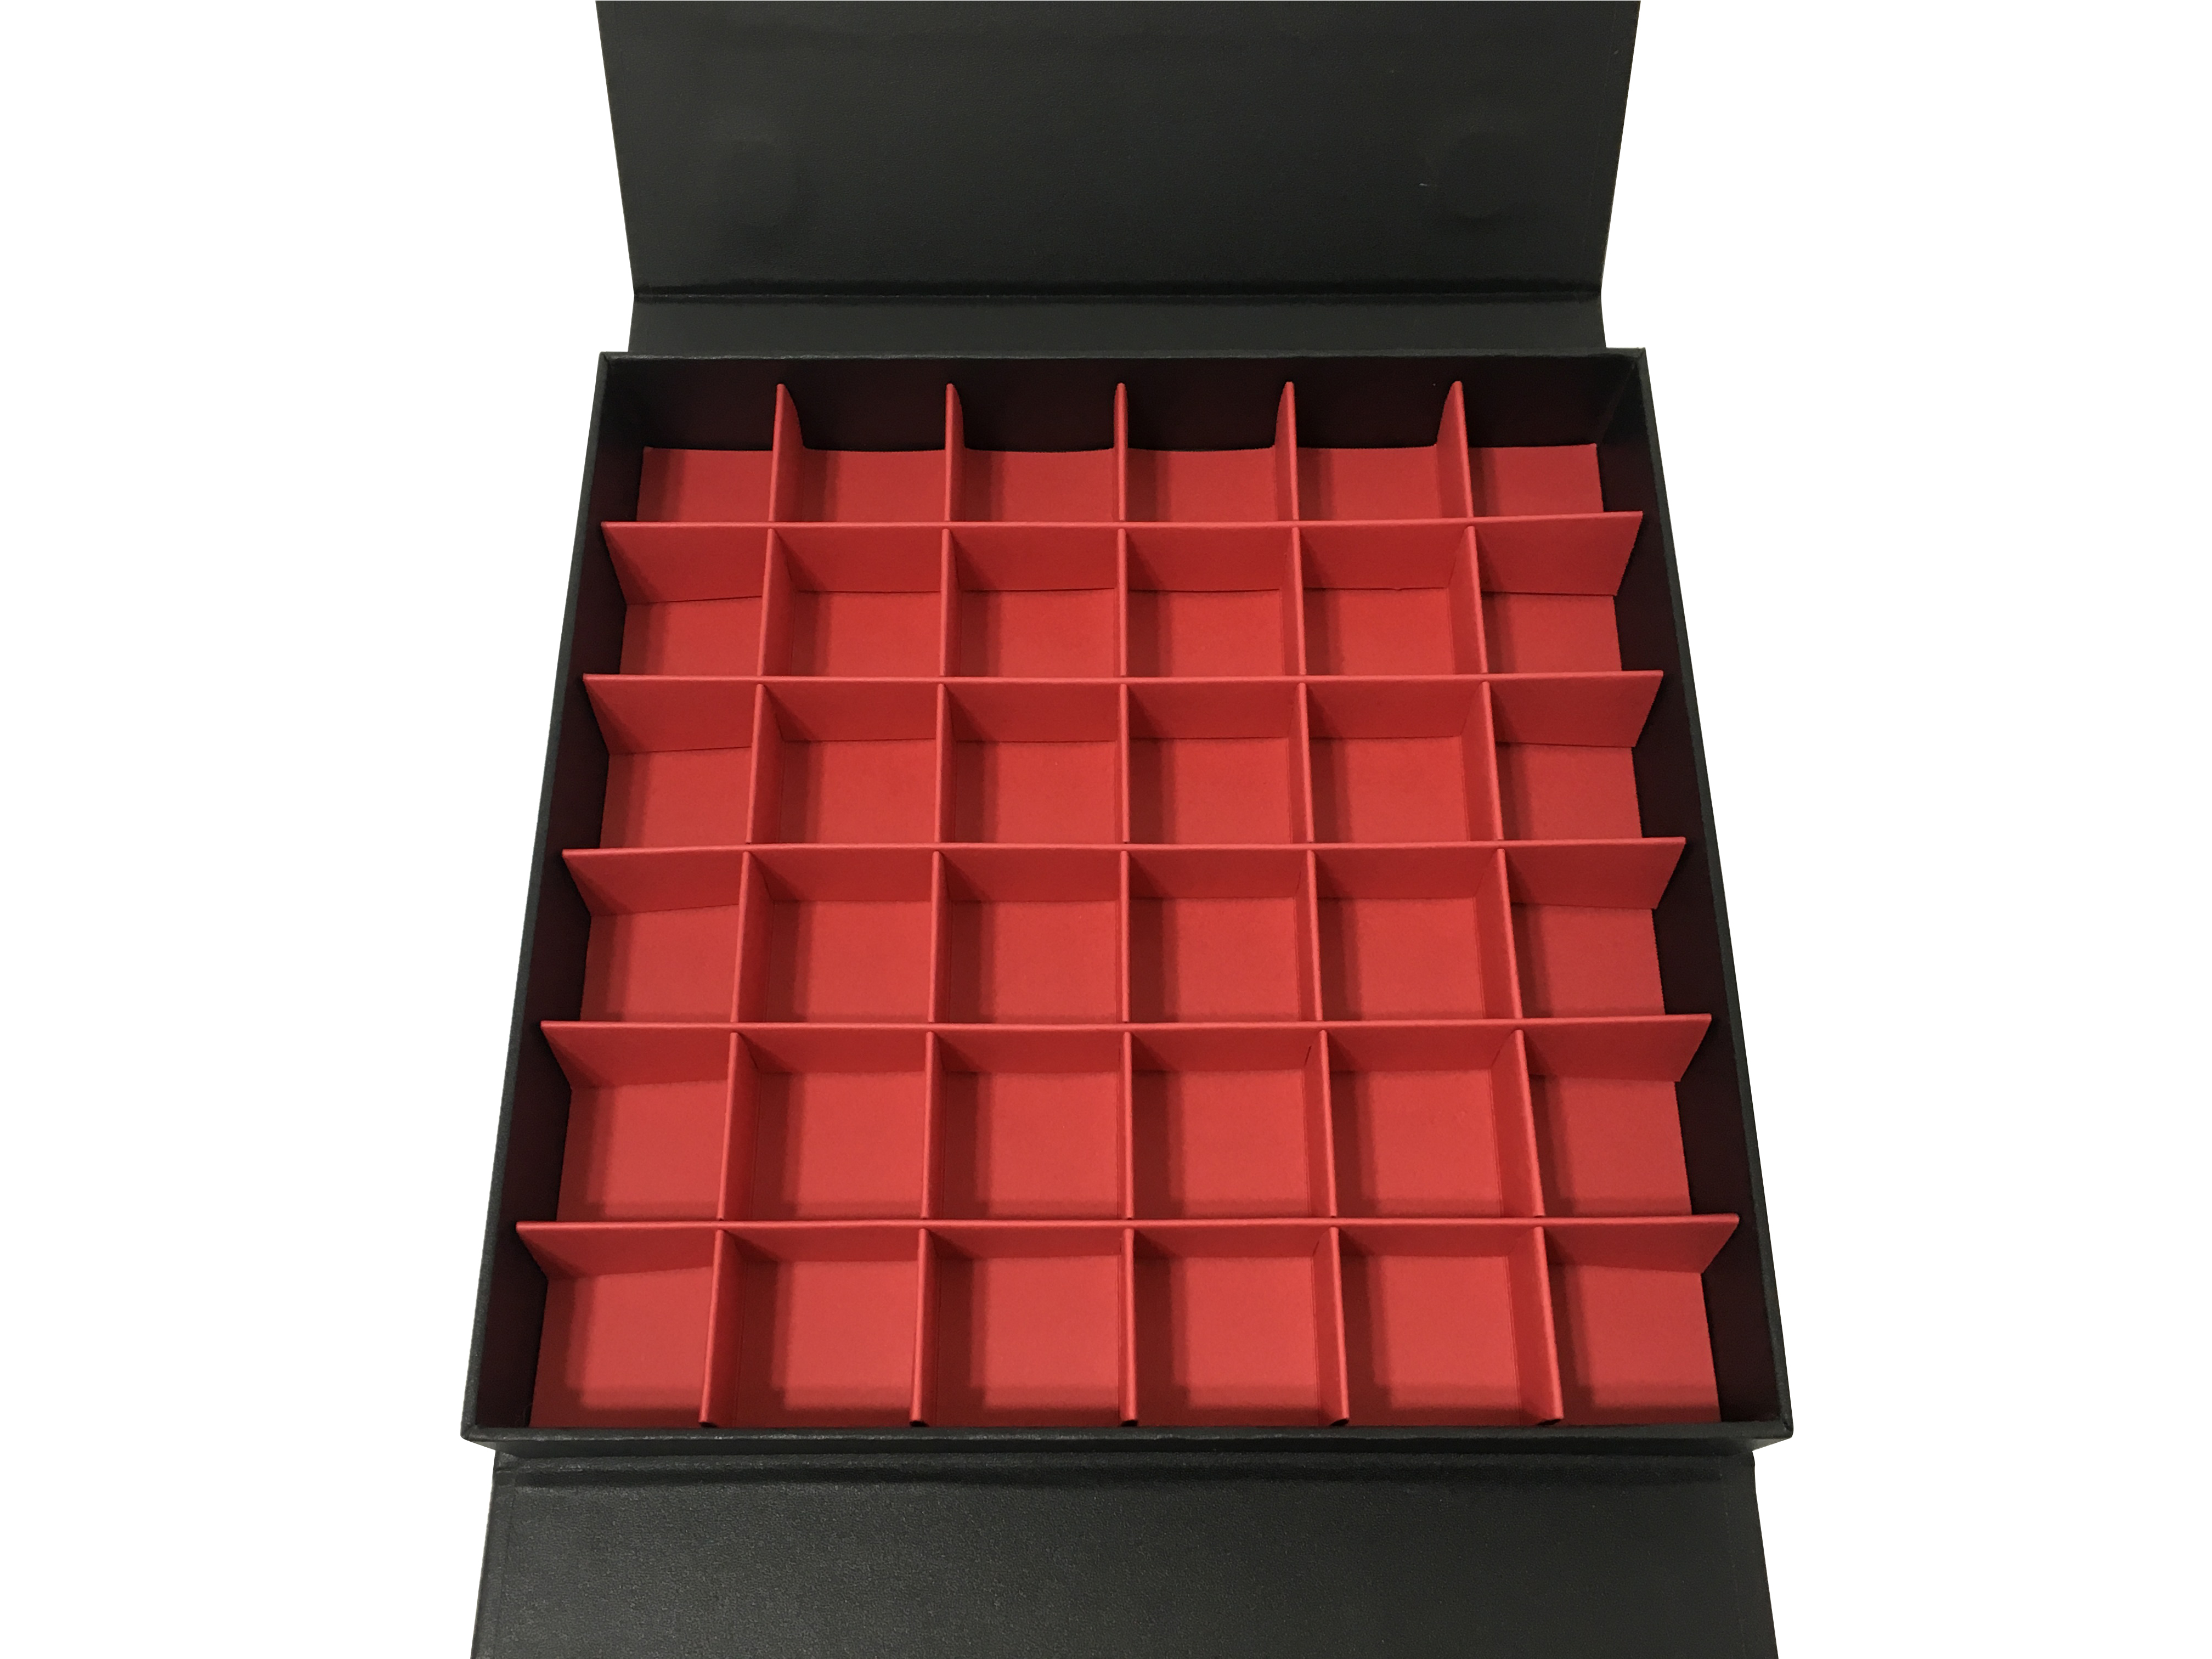 36 pcs load chocolate box hand made luxury chocolate box rigid chocolate box chocolate gift box with paper divider 